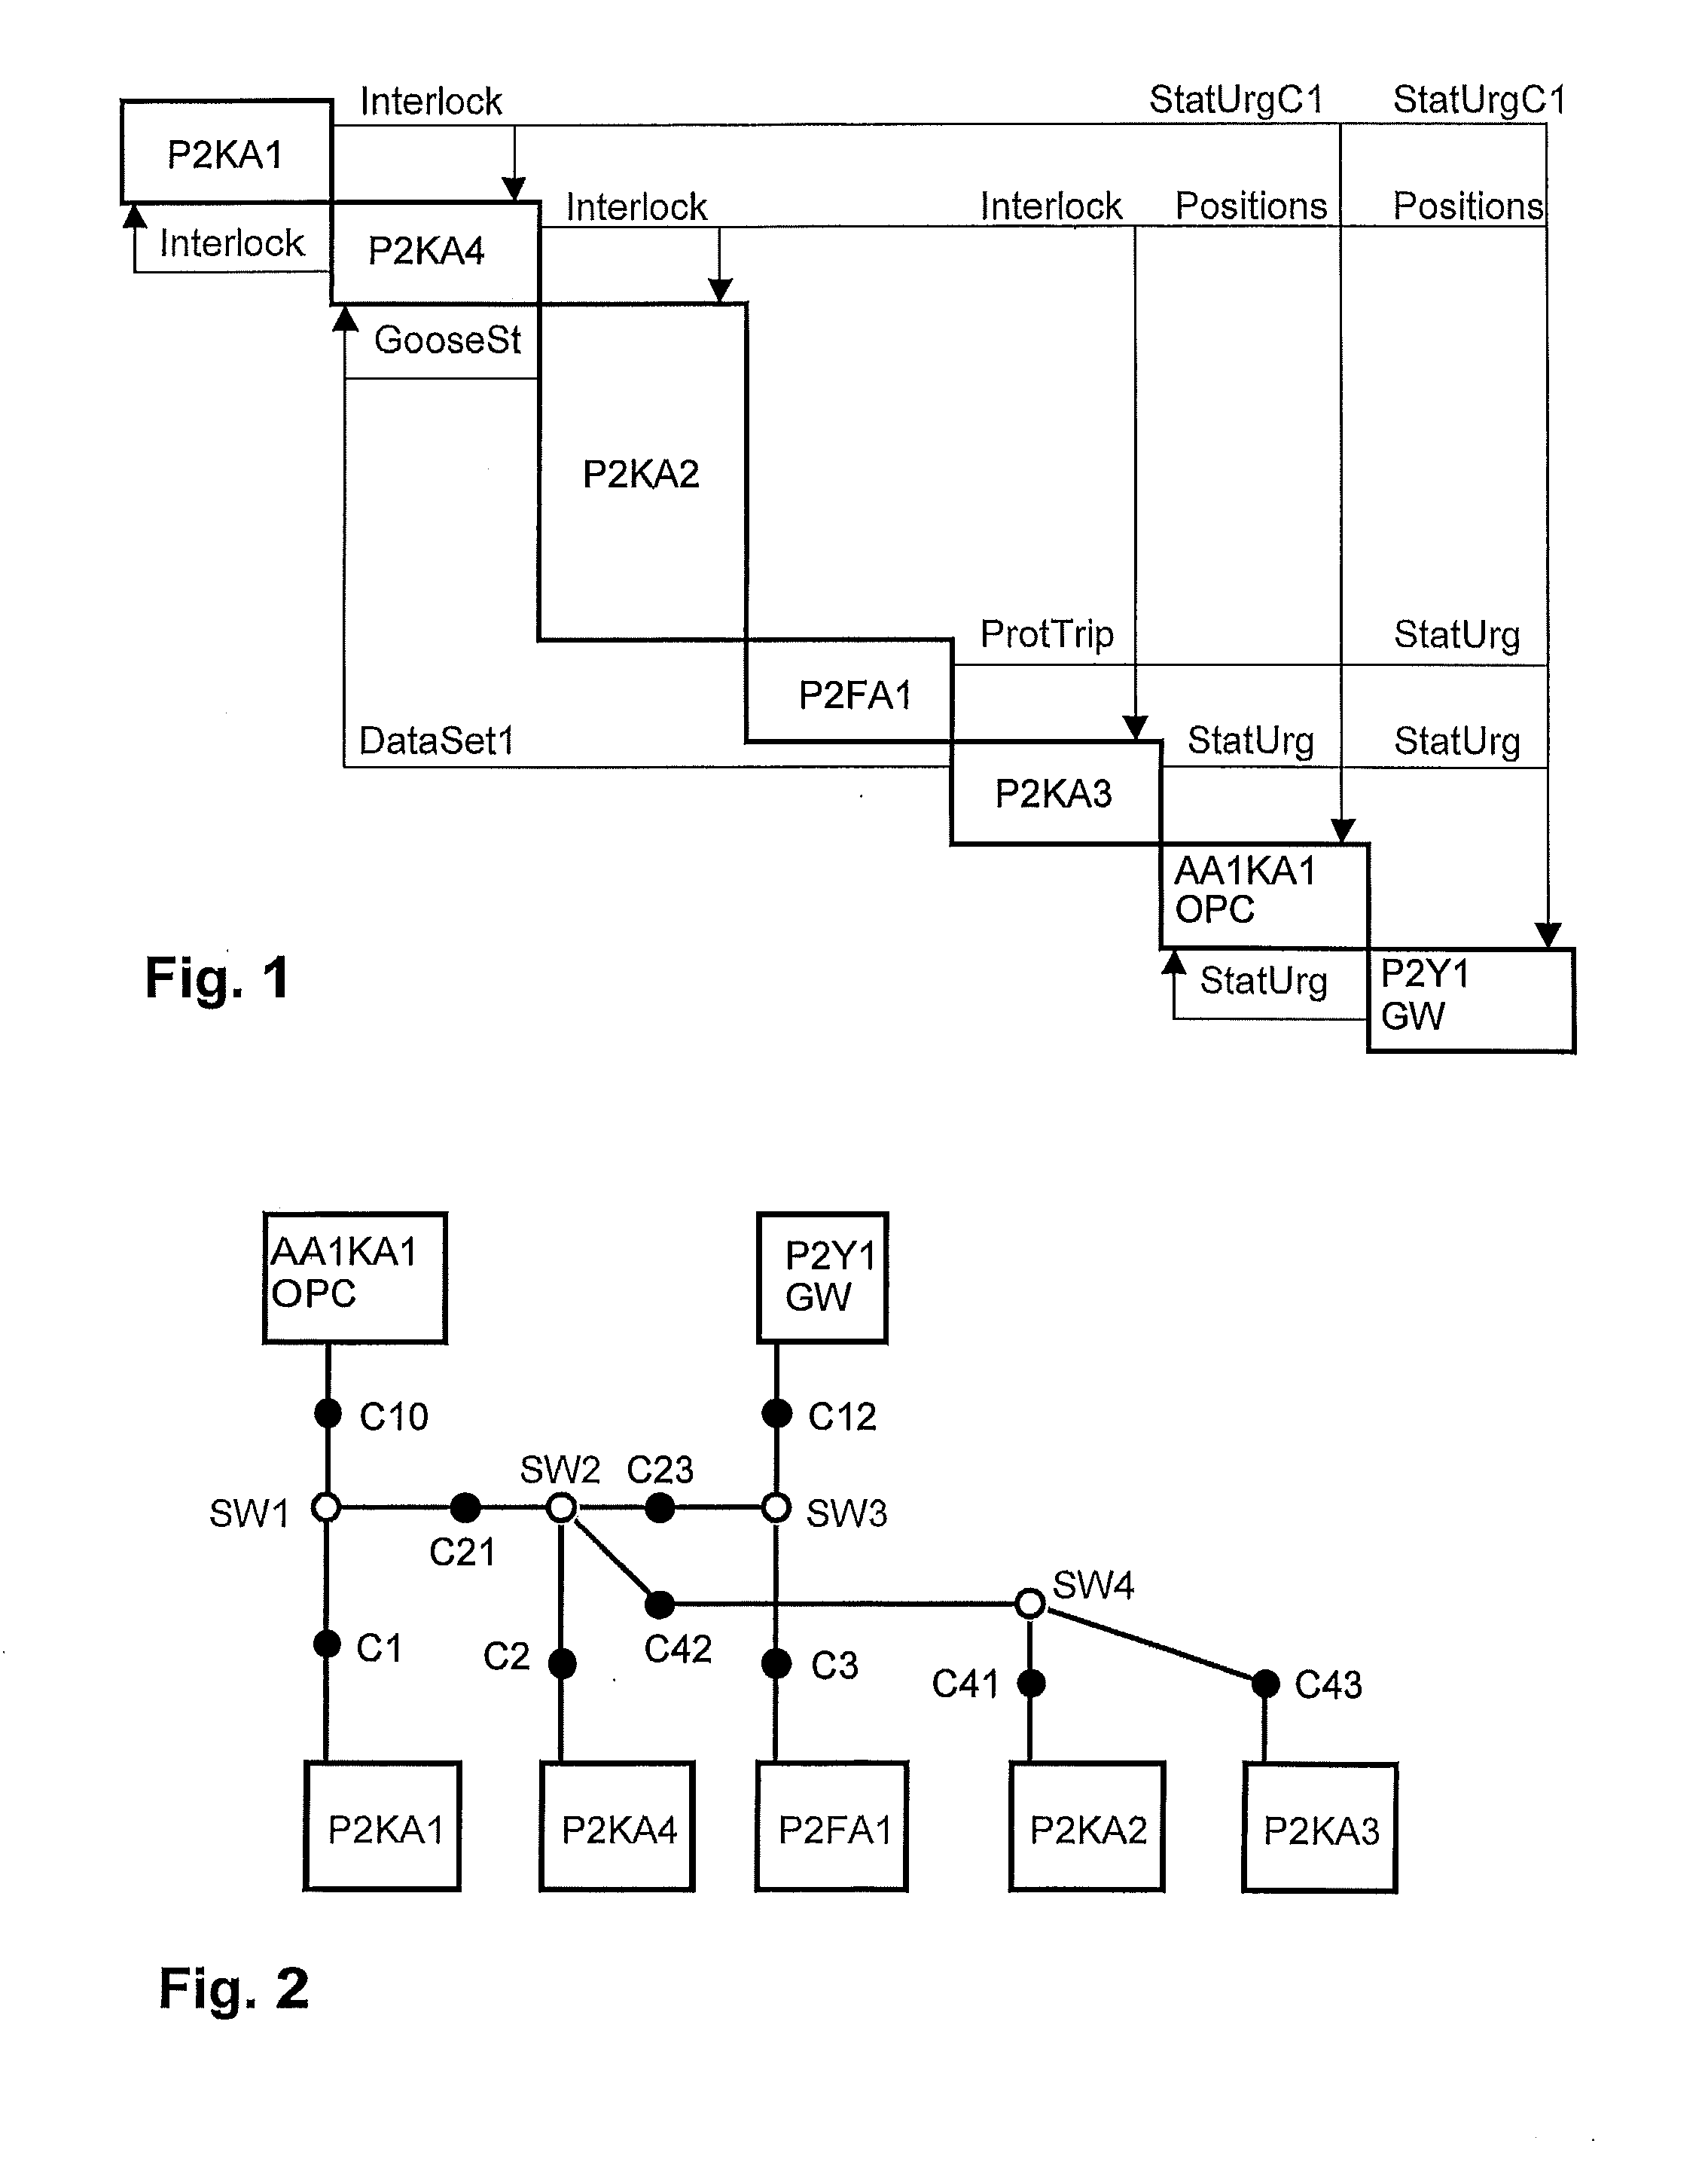 Configuration of a process control system